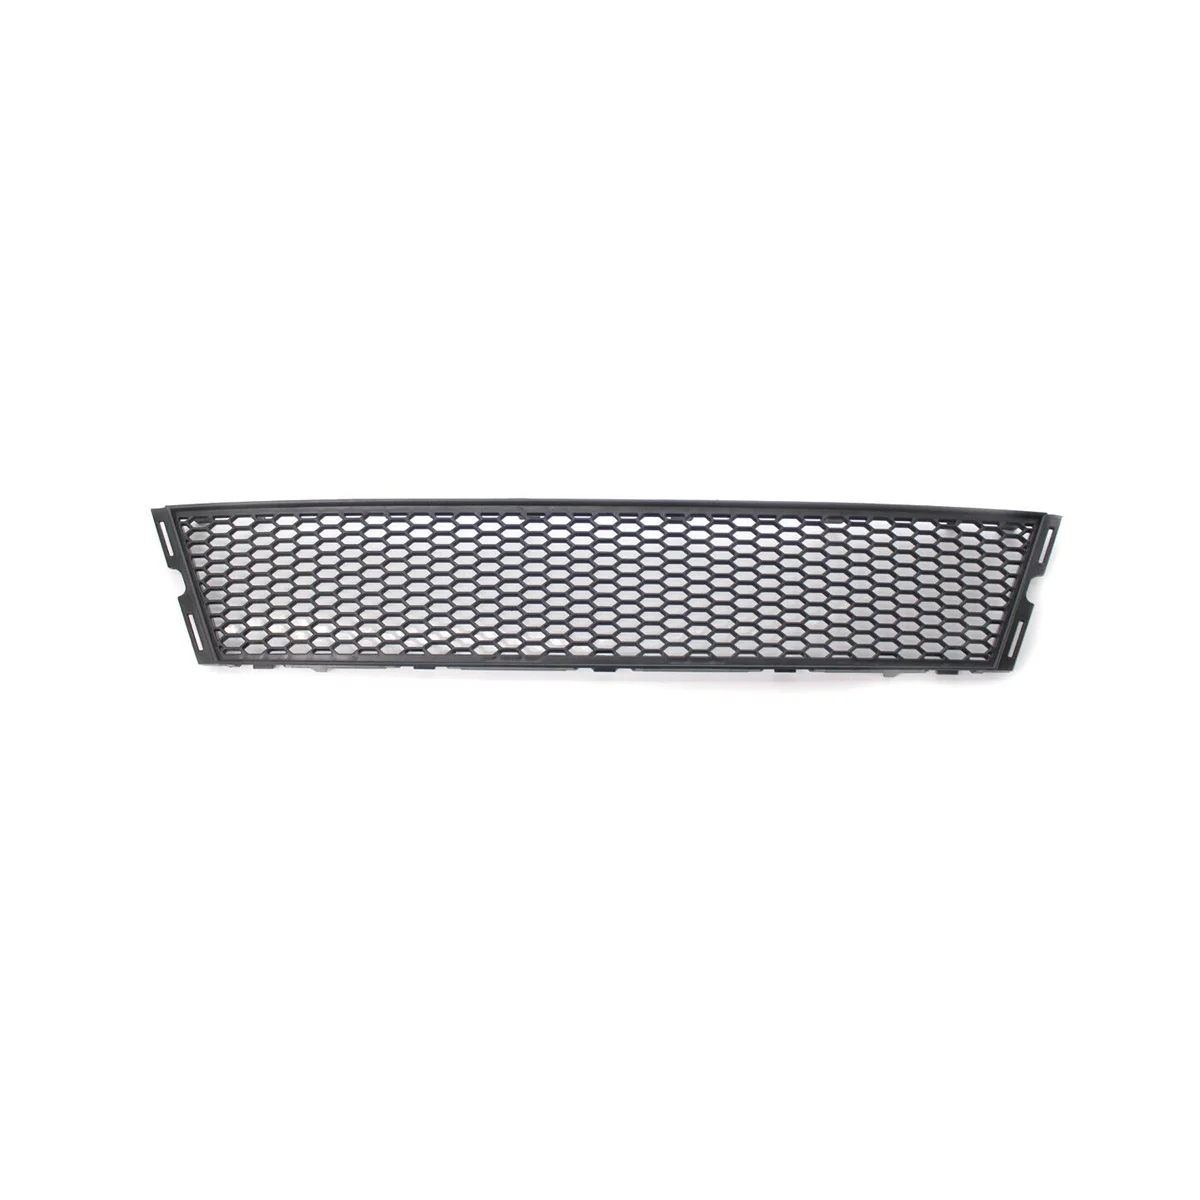 

For BMW 3 Series E92 E93 LCI 2011-2013 Accessories Front Bumper Lower Honeycomb Grilles Covers 51117227889, Black ABS